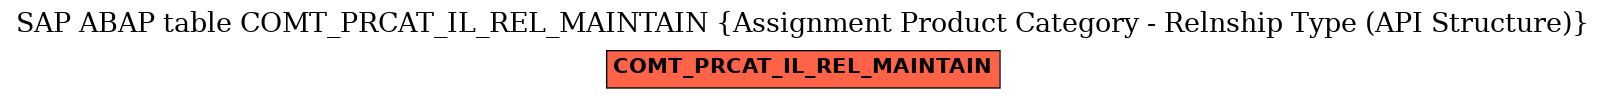 E-R Diagram for table COMT_PRCAT_IL_REL_MAINTAIN (Assignment Product Category - Relnship Type (API Structure))